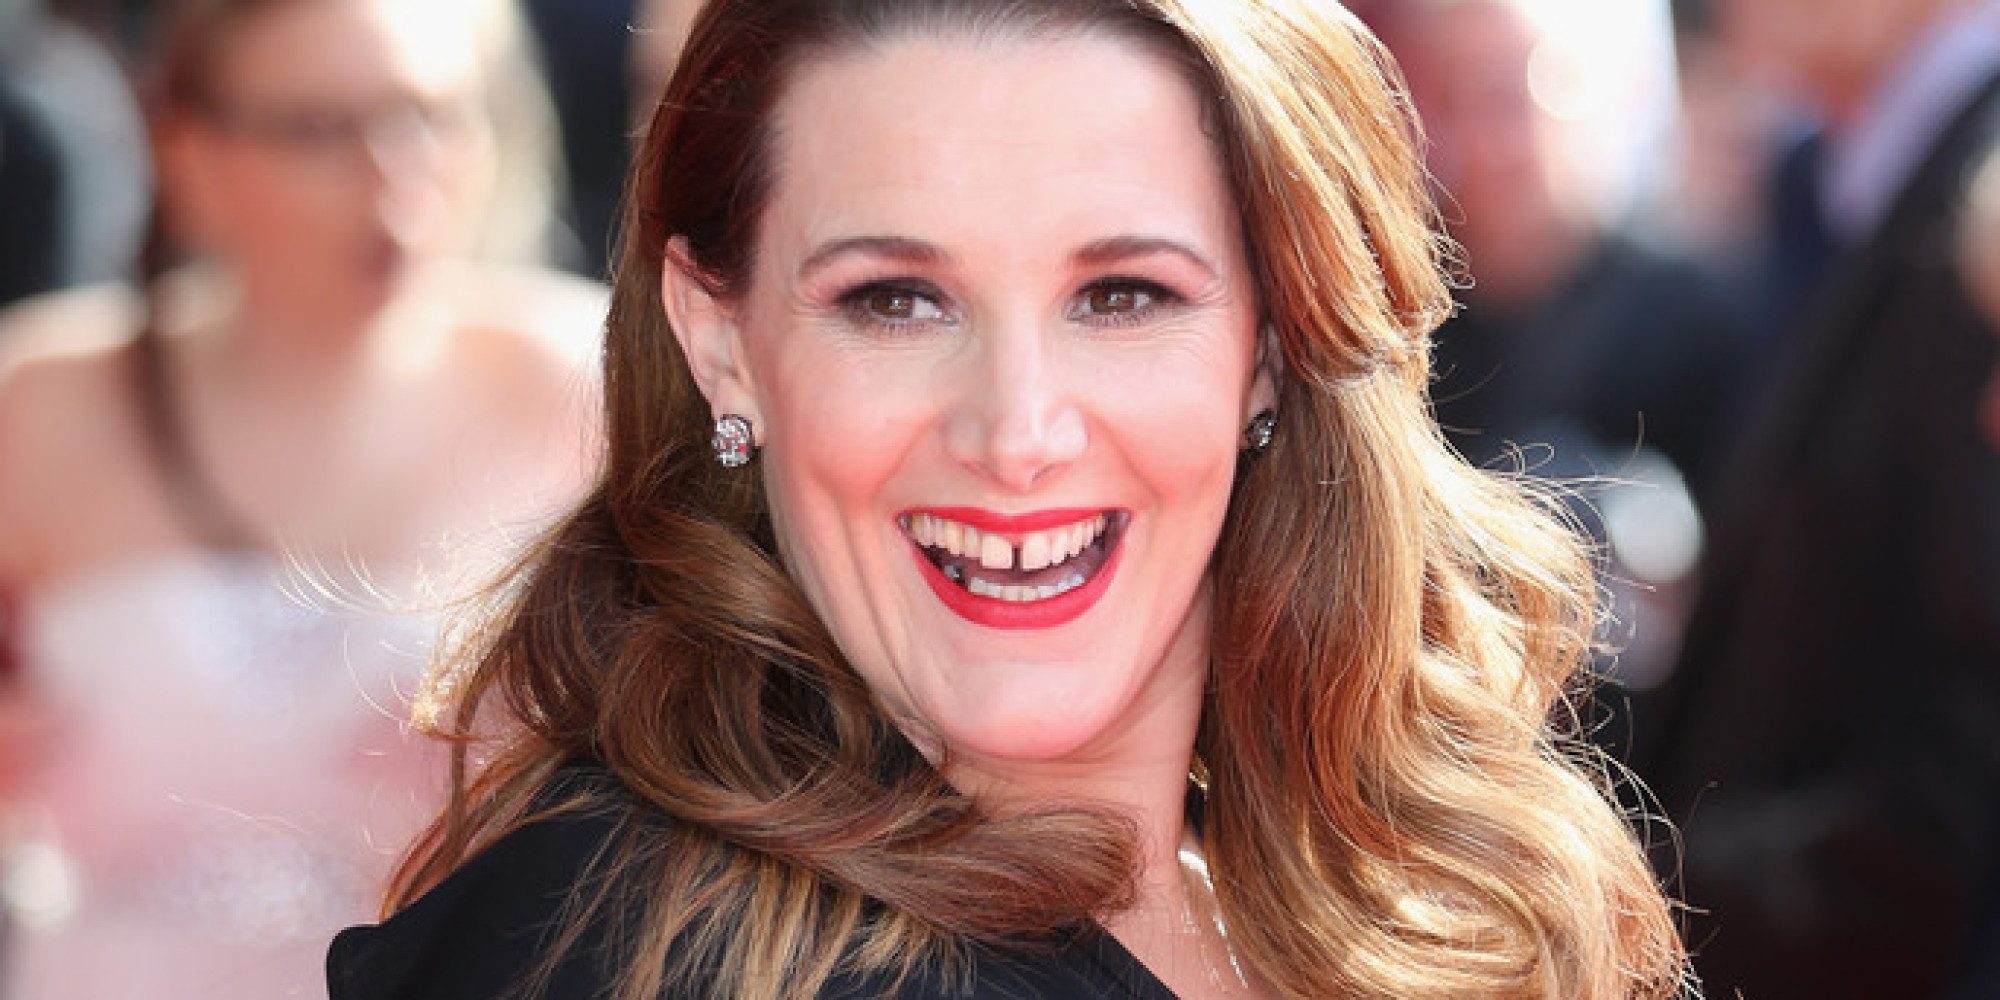 'X Factor' Winner Sam Bailey 'My Daughter Hopes The New Baby Is A Girl